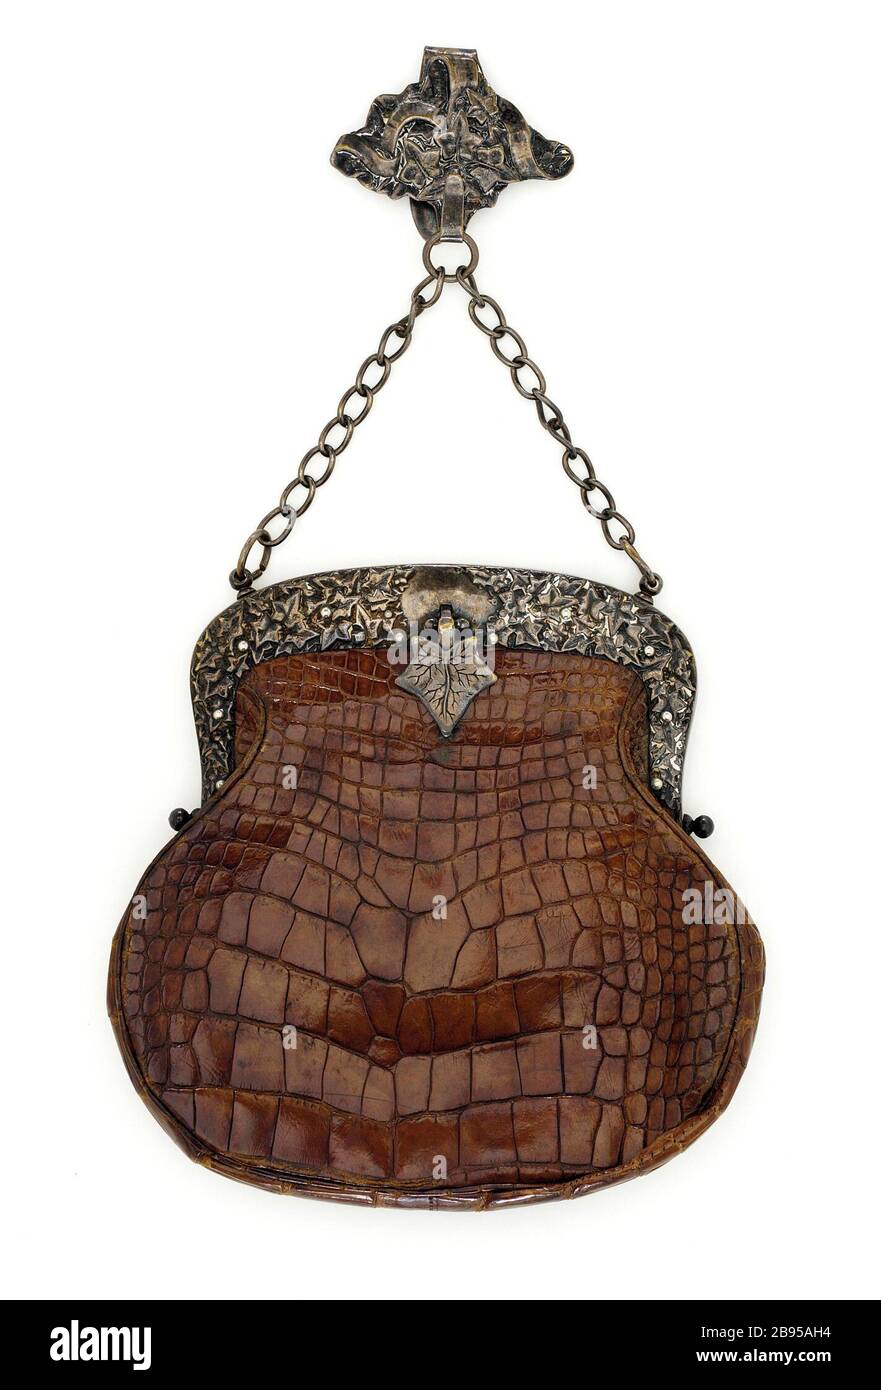 Share more than 71 vintage alligator bags latest - in.duhocakina